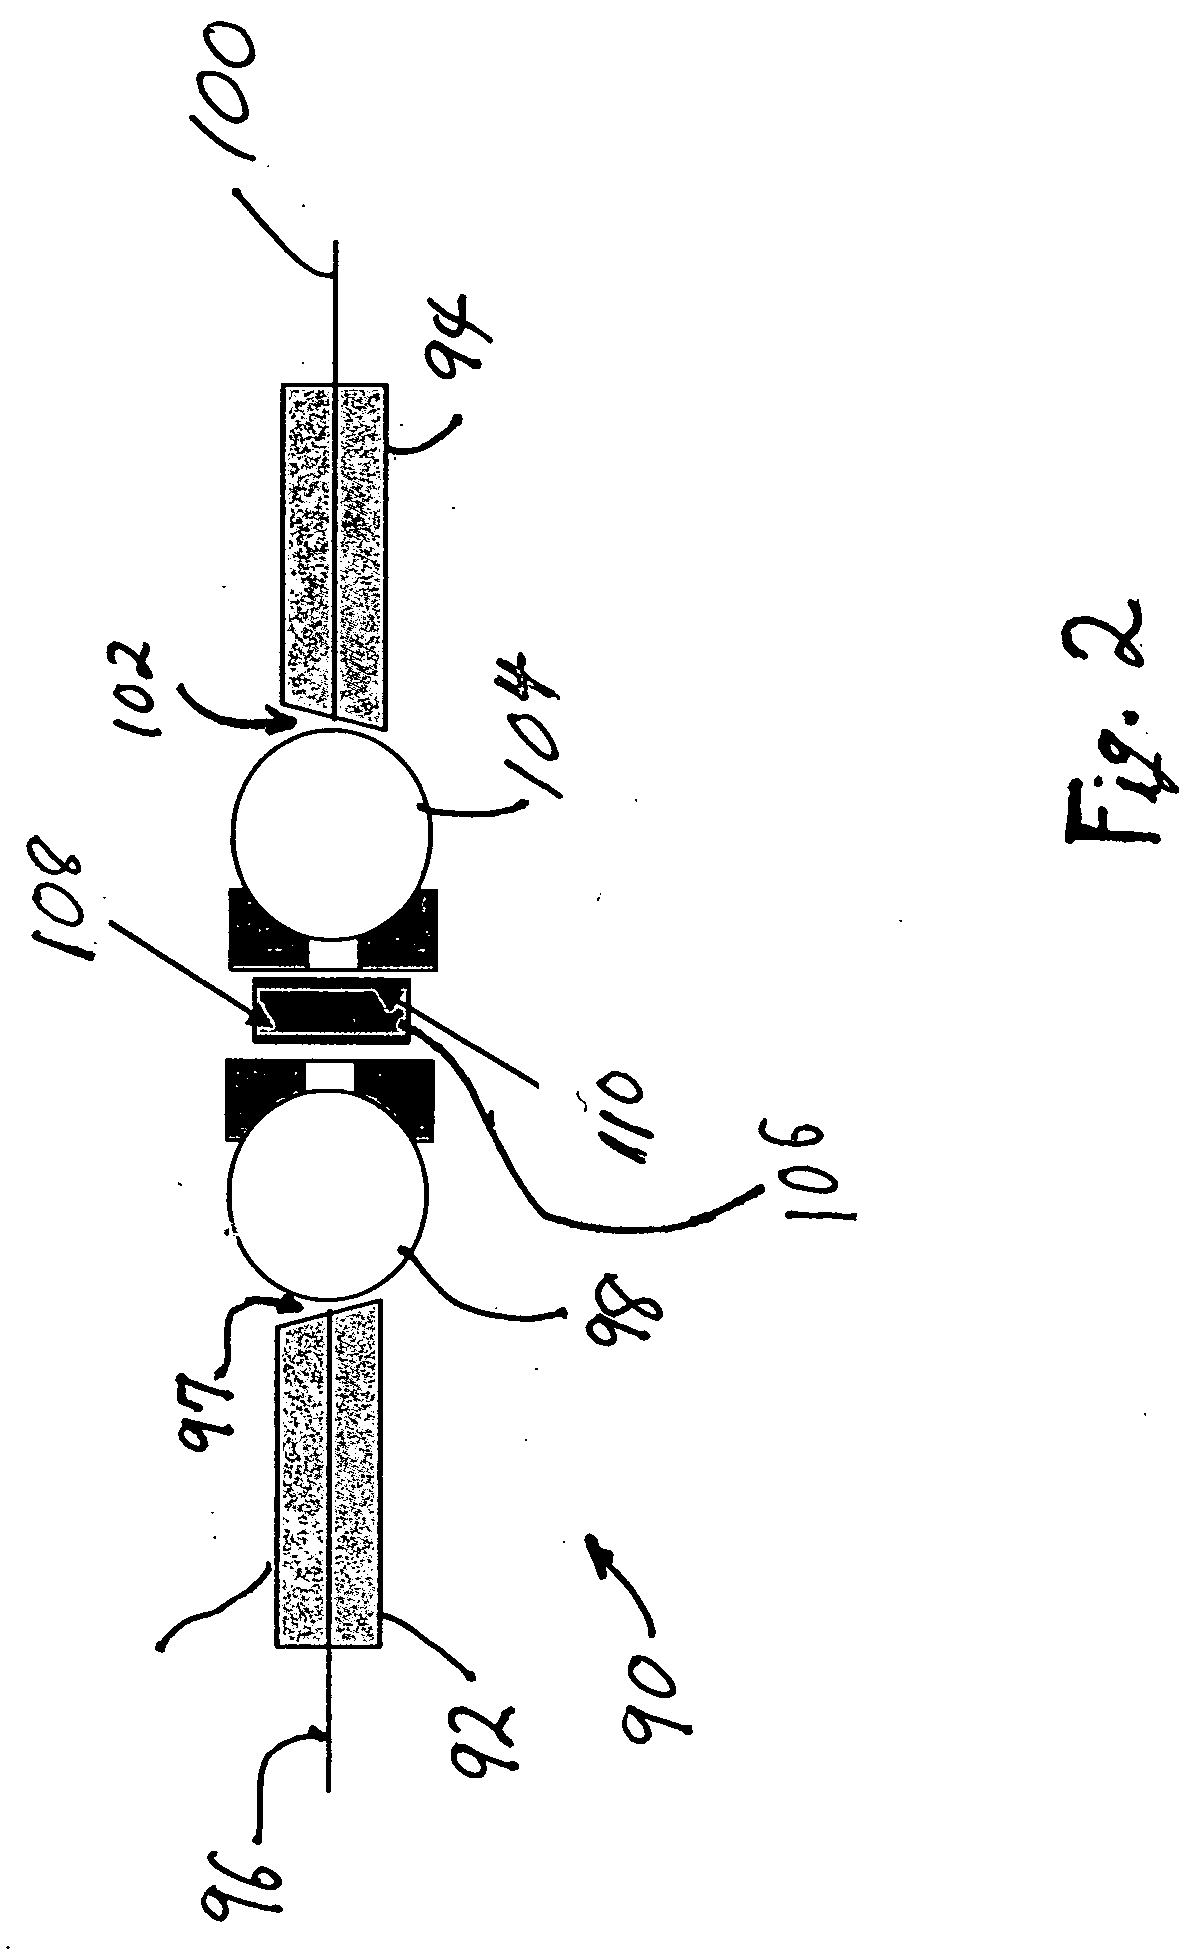 Gain-flattening apparatus and methods and optical amplifiers employing same